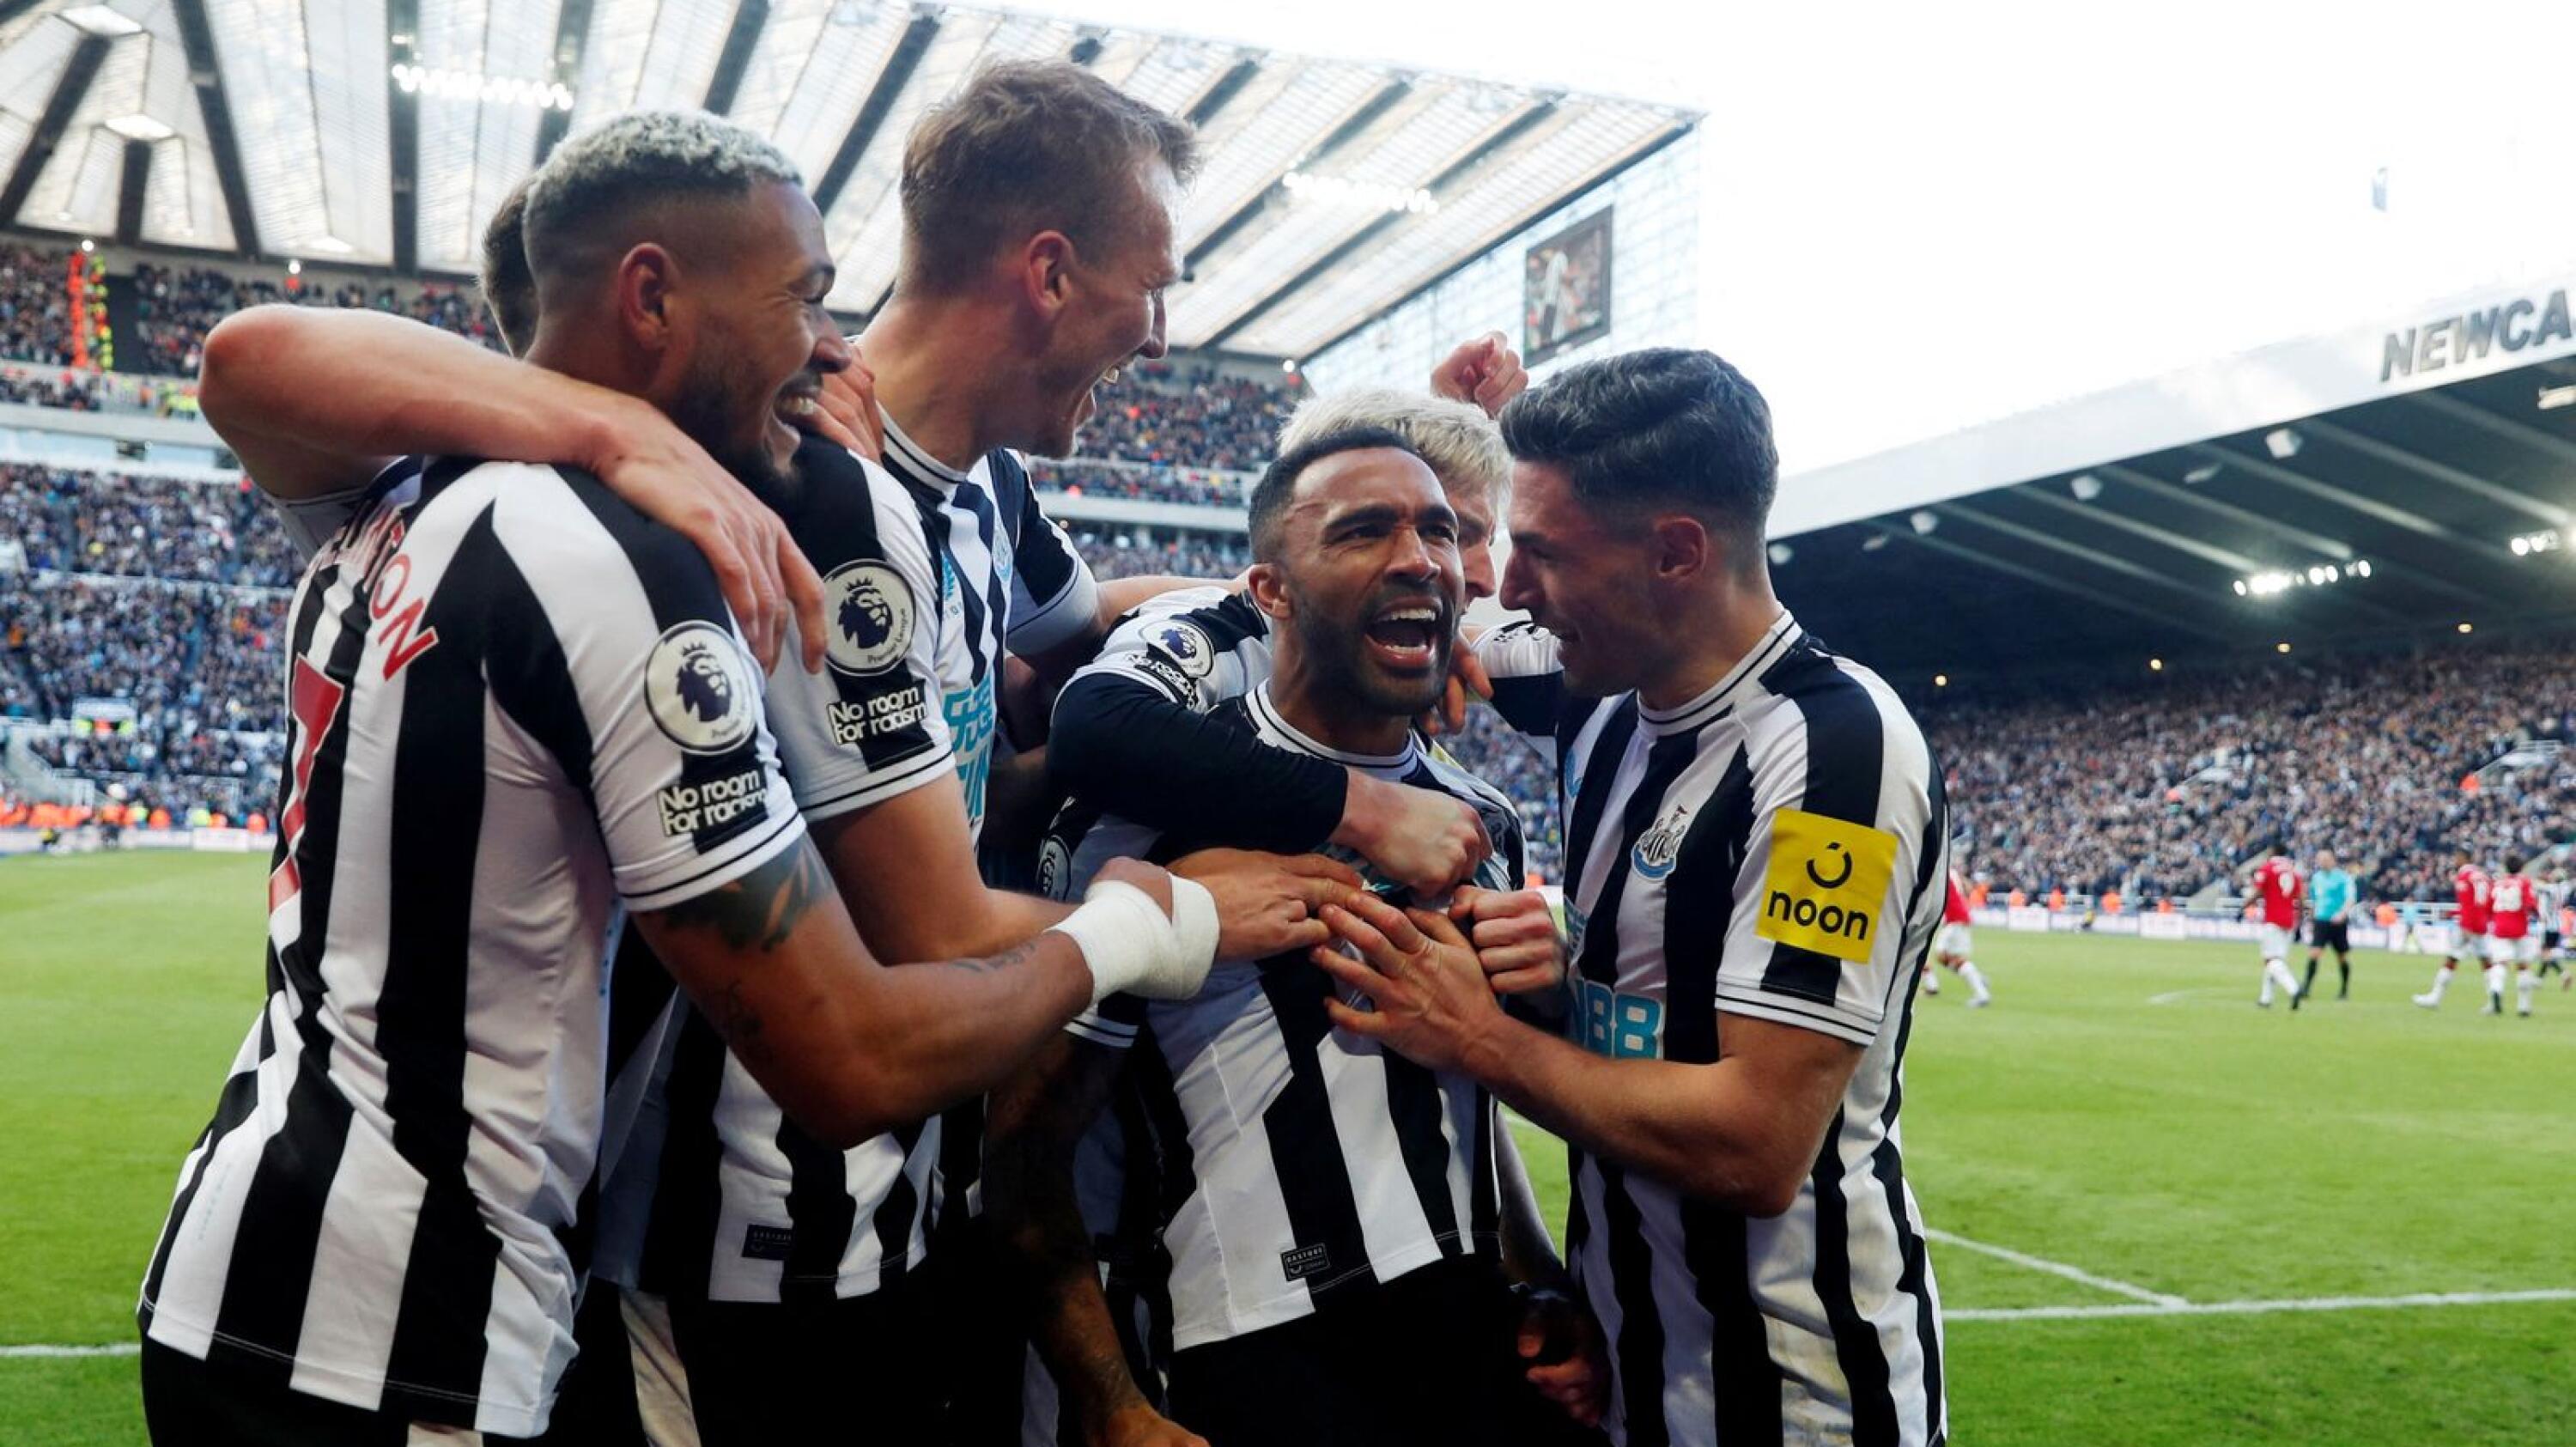 Callum Wilson celebrates after scoring Newcastle’s second goal against Manchester United at St James’ Park on Sunday.